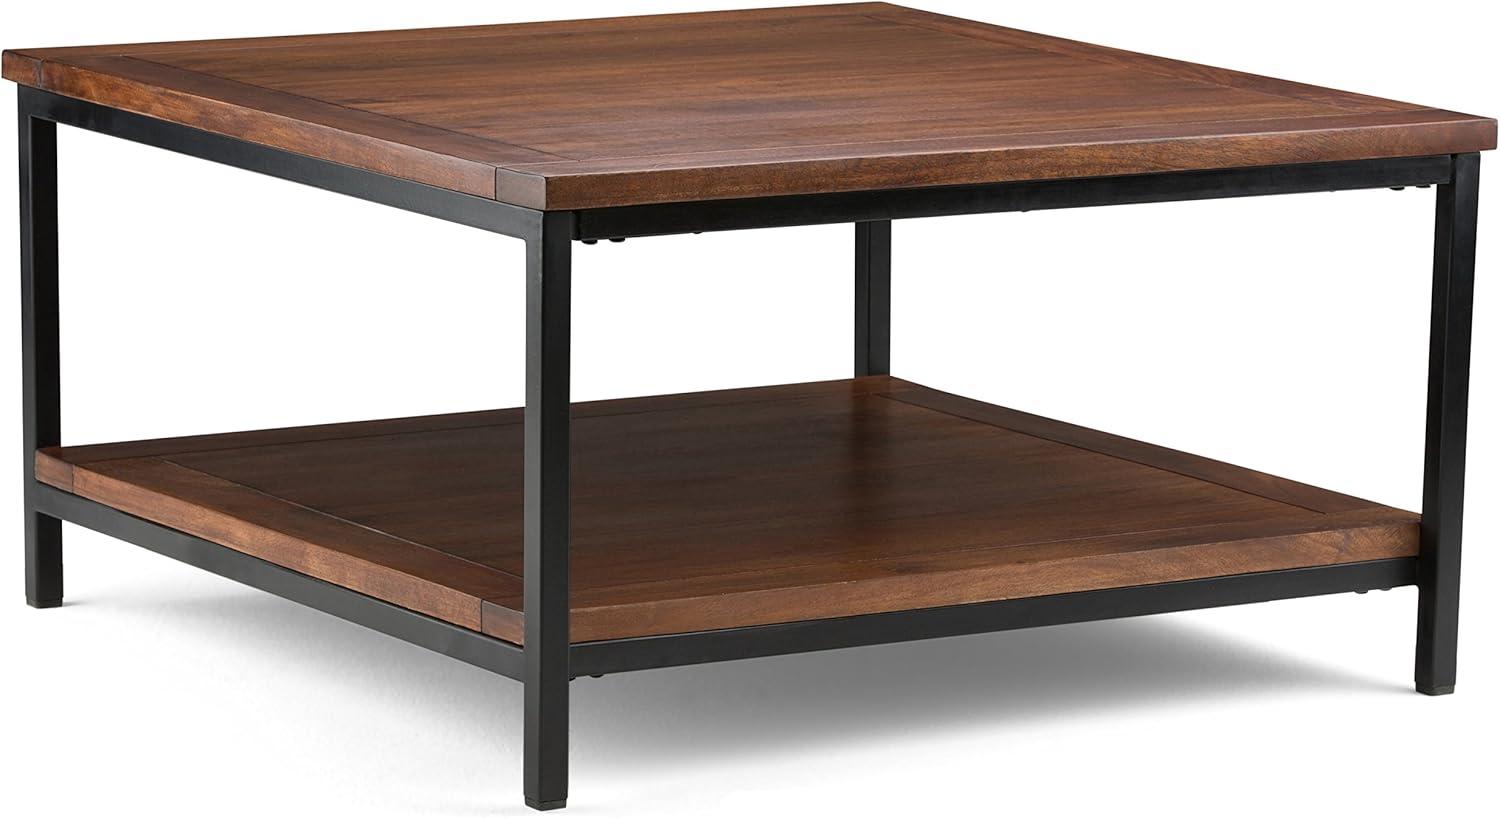 Modern Industrial Black Metal Square Coffee Table with Storage